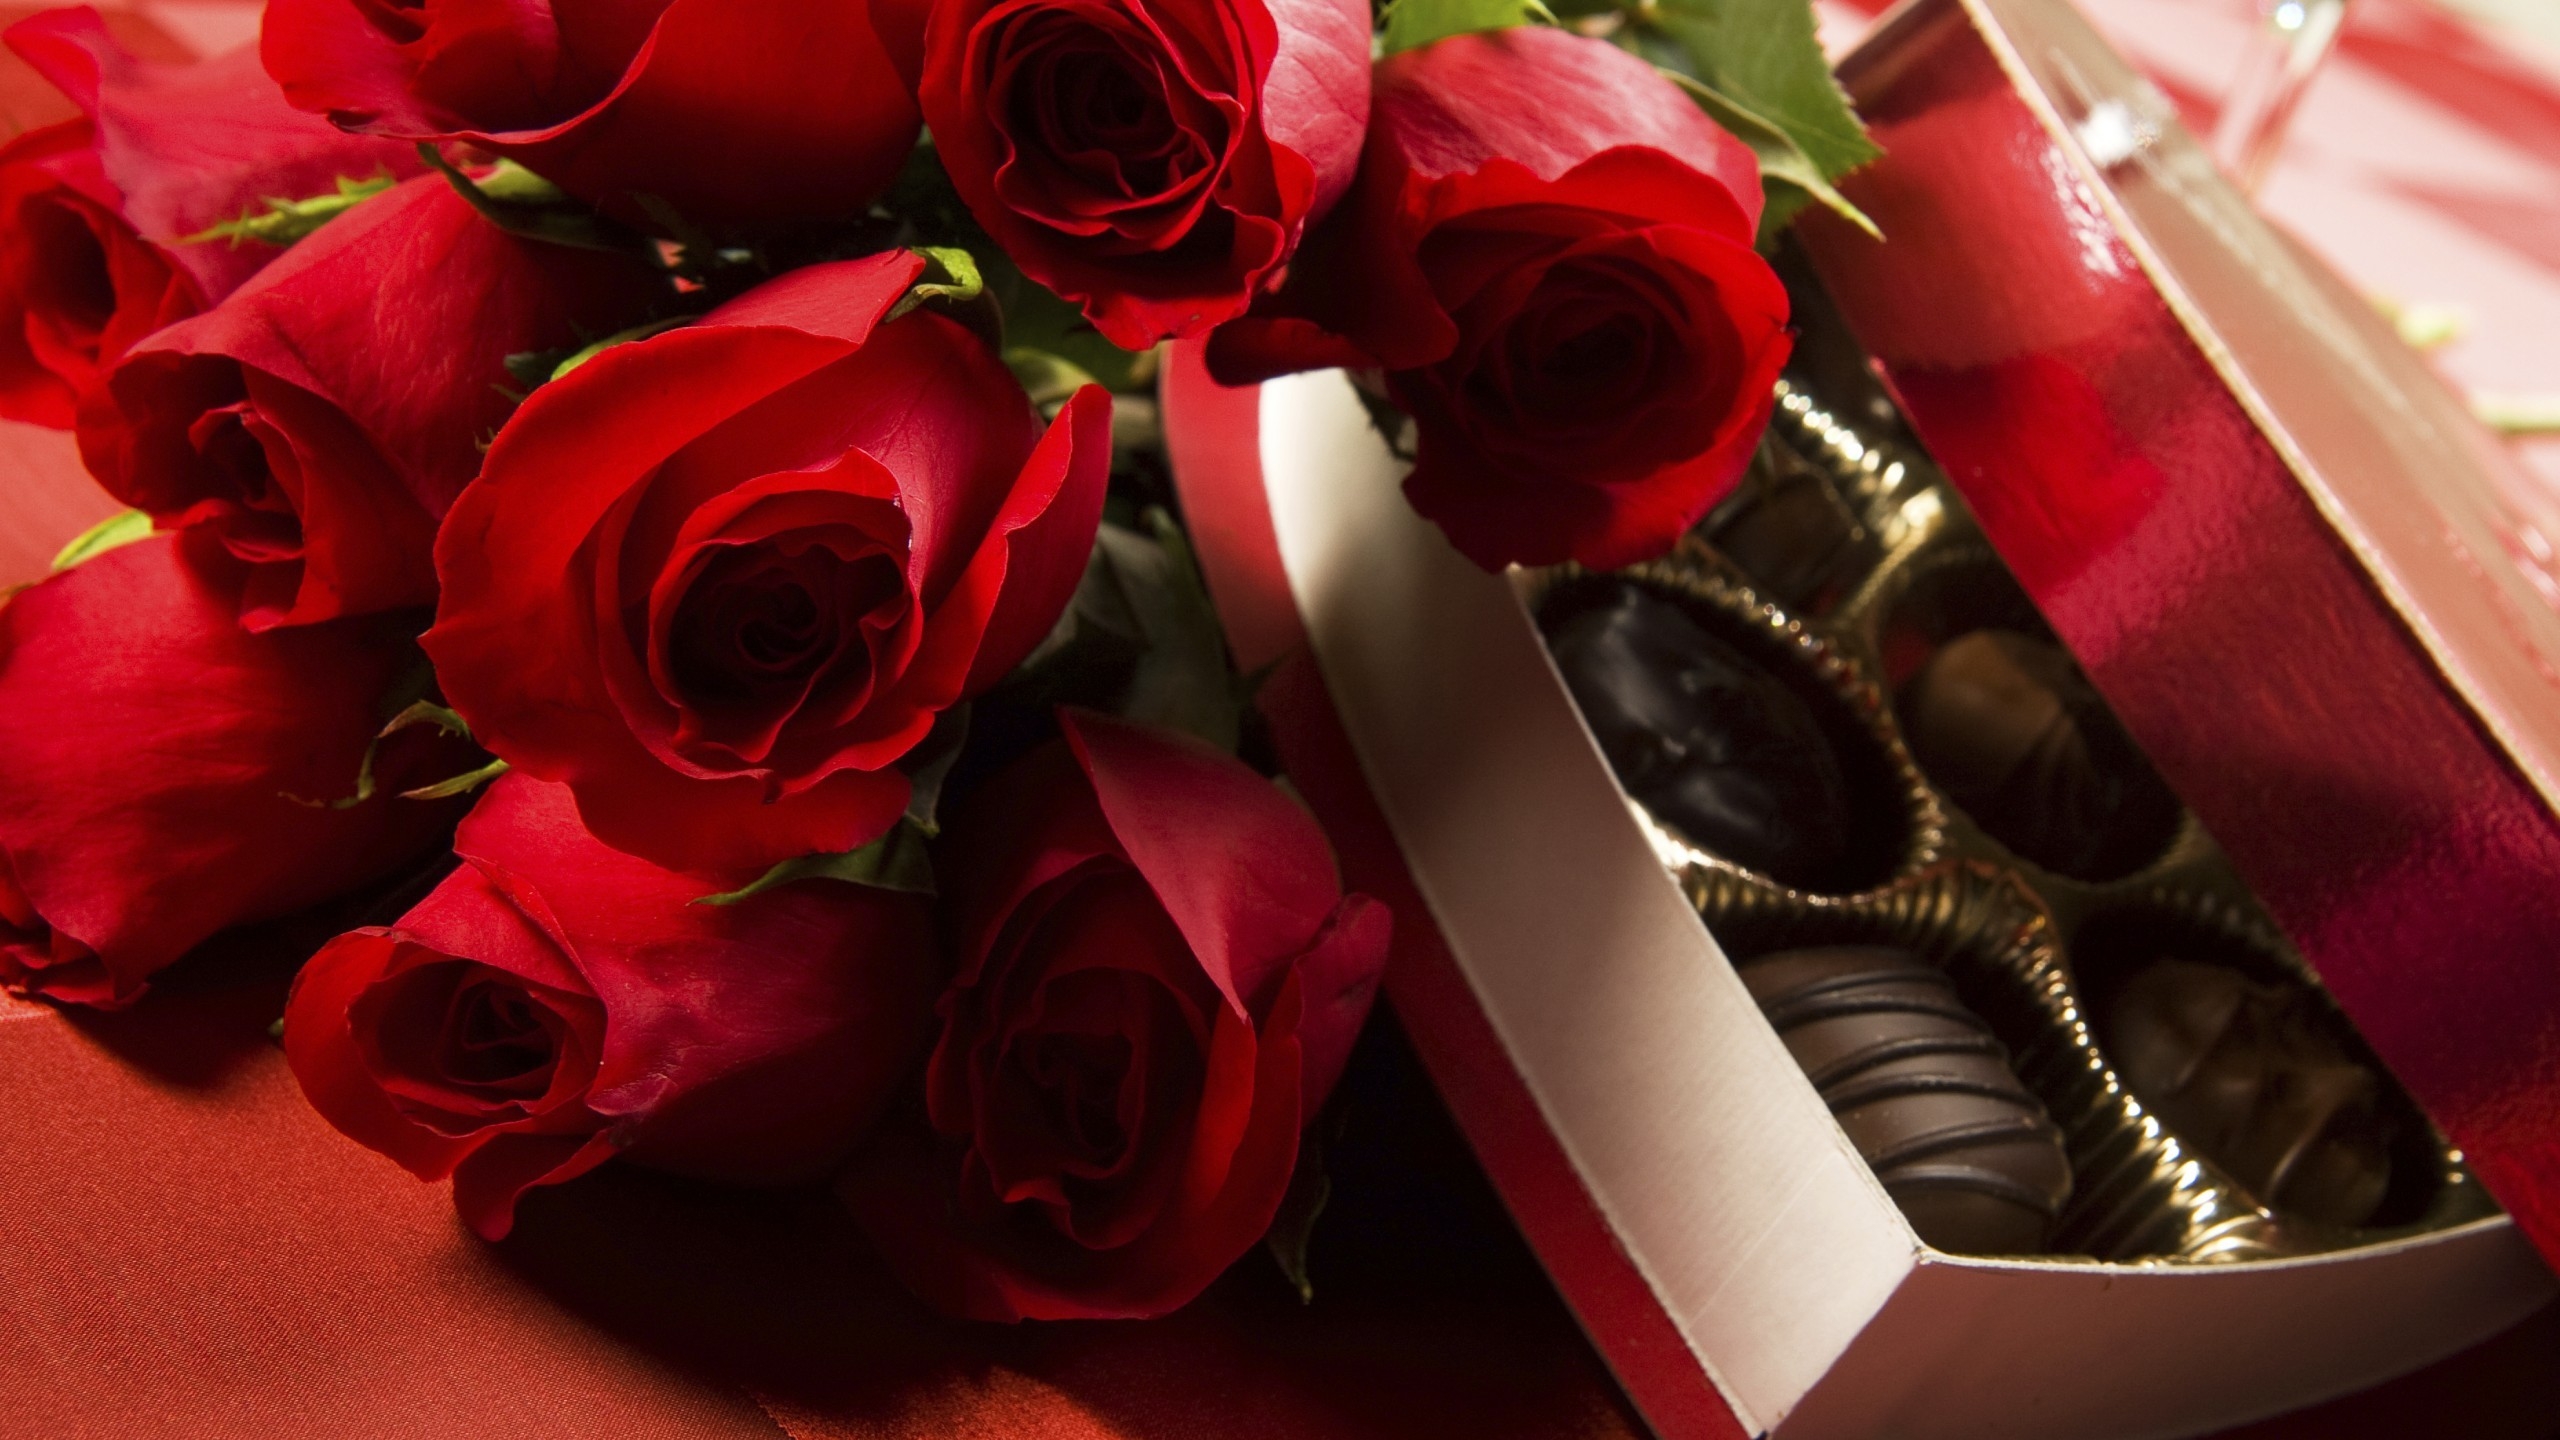 Roses And Chocolate for 2560x1440 HDTV resolution